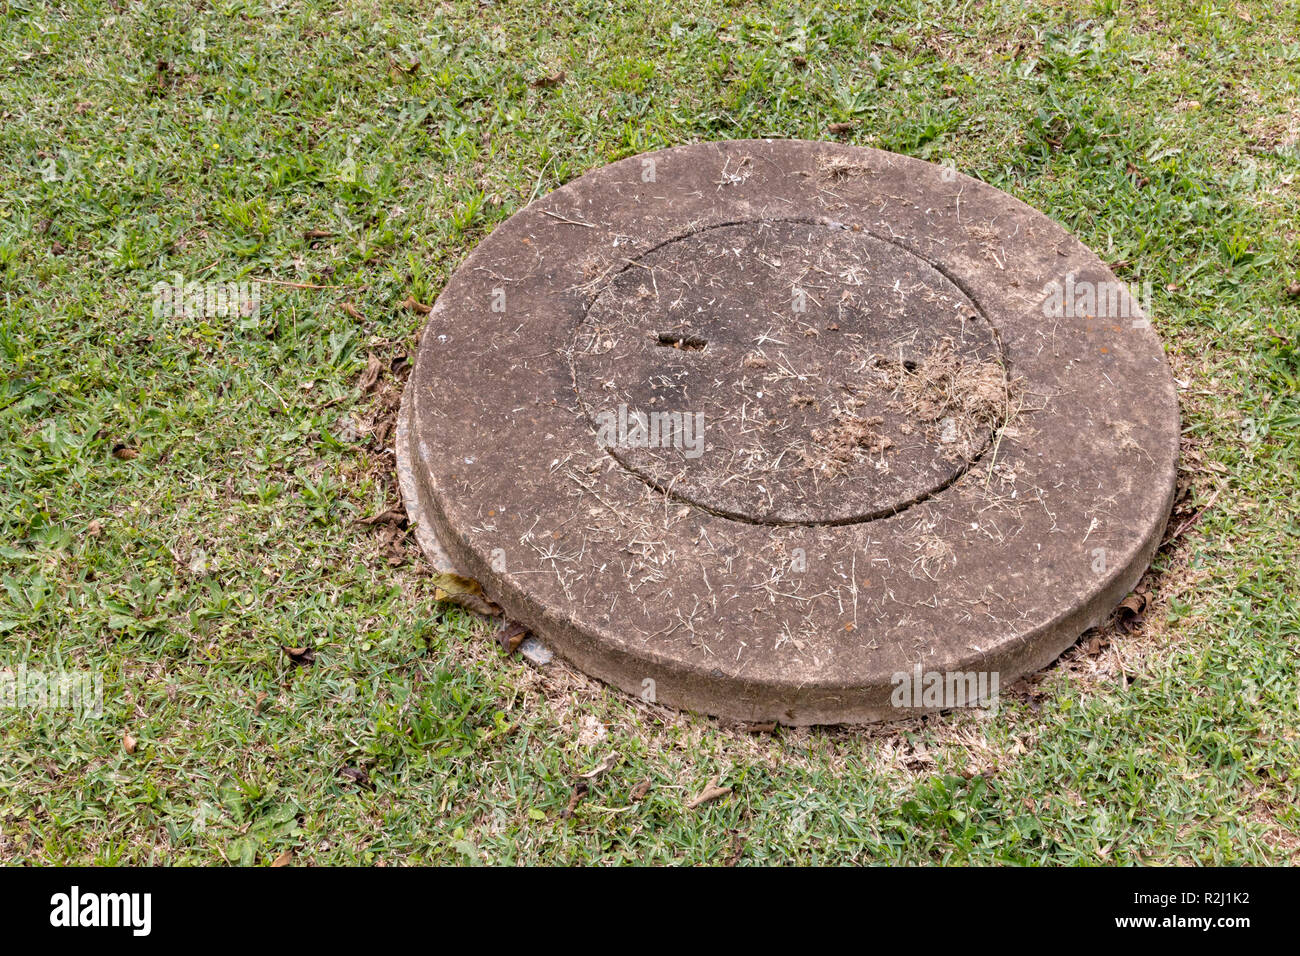 A close up view of a concrete man hole cover over the water system with dried grass that has been cut around it Stock Photo